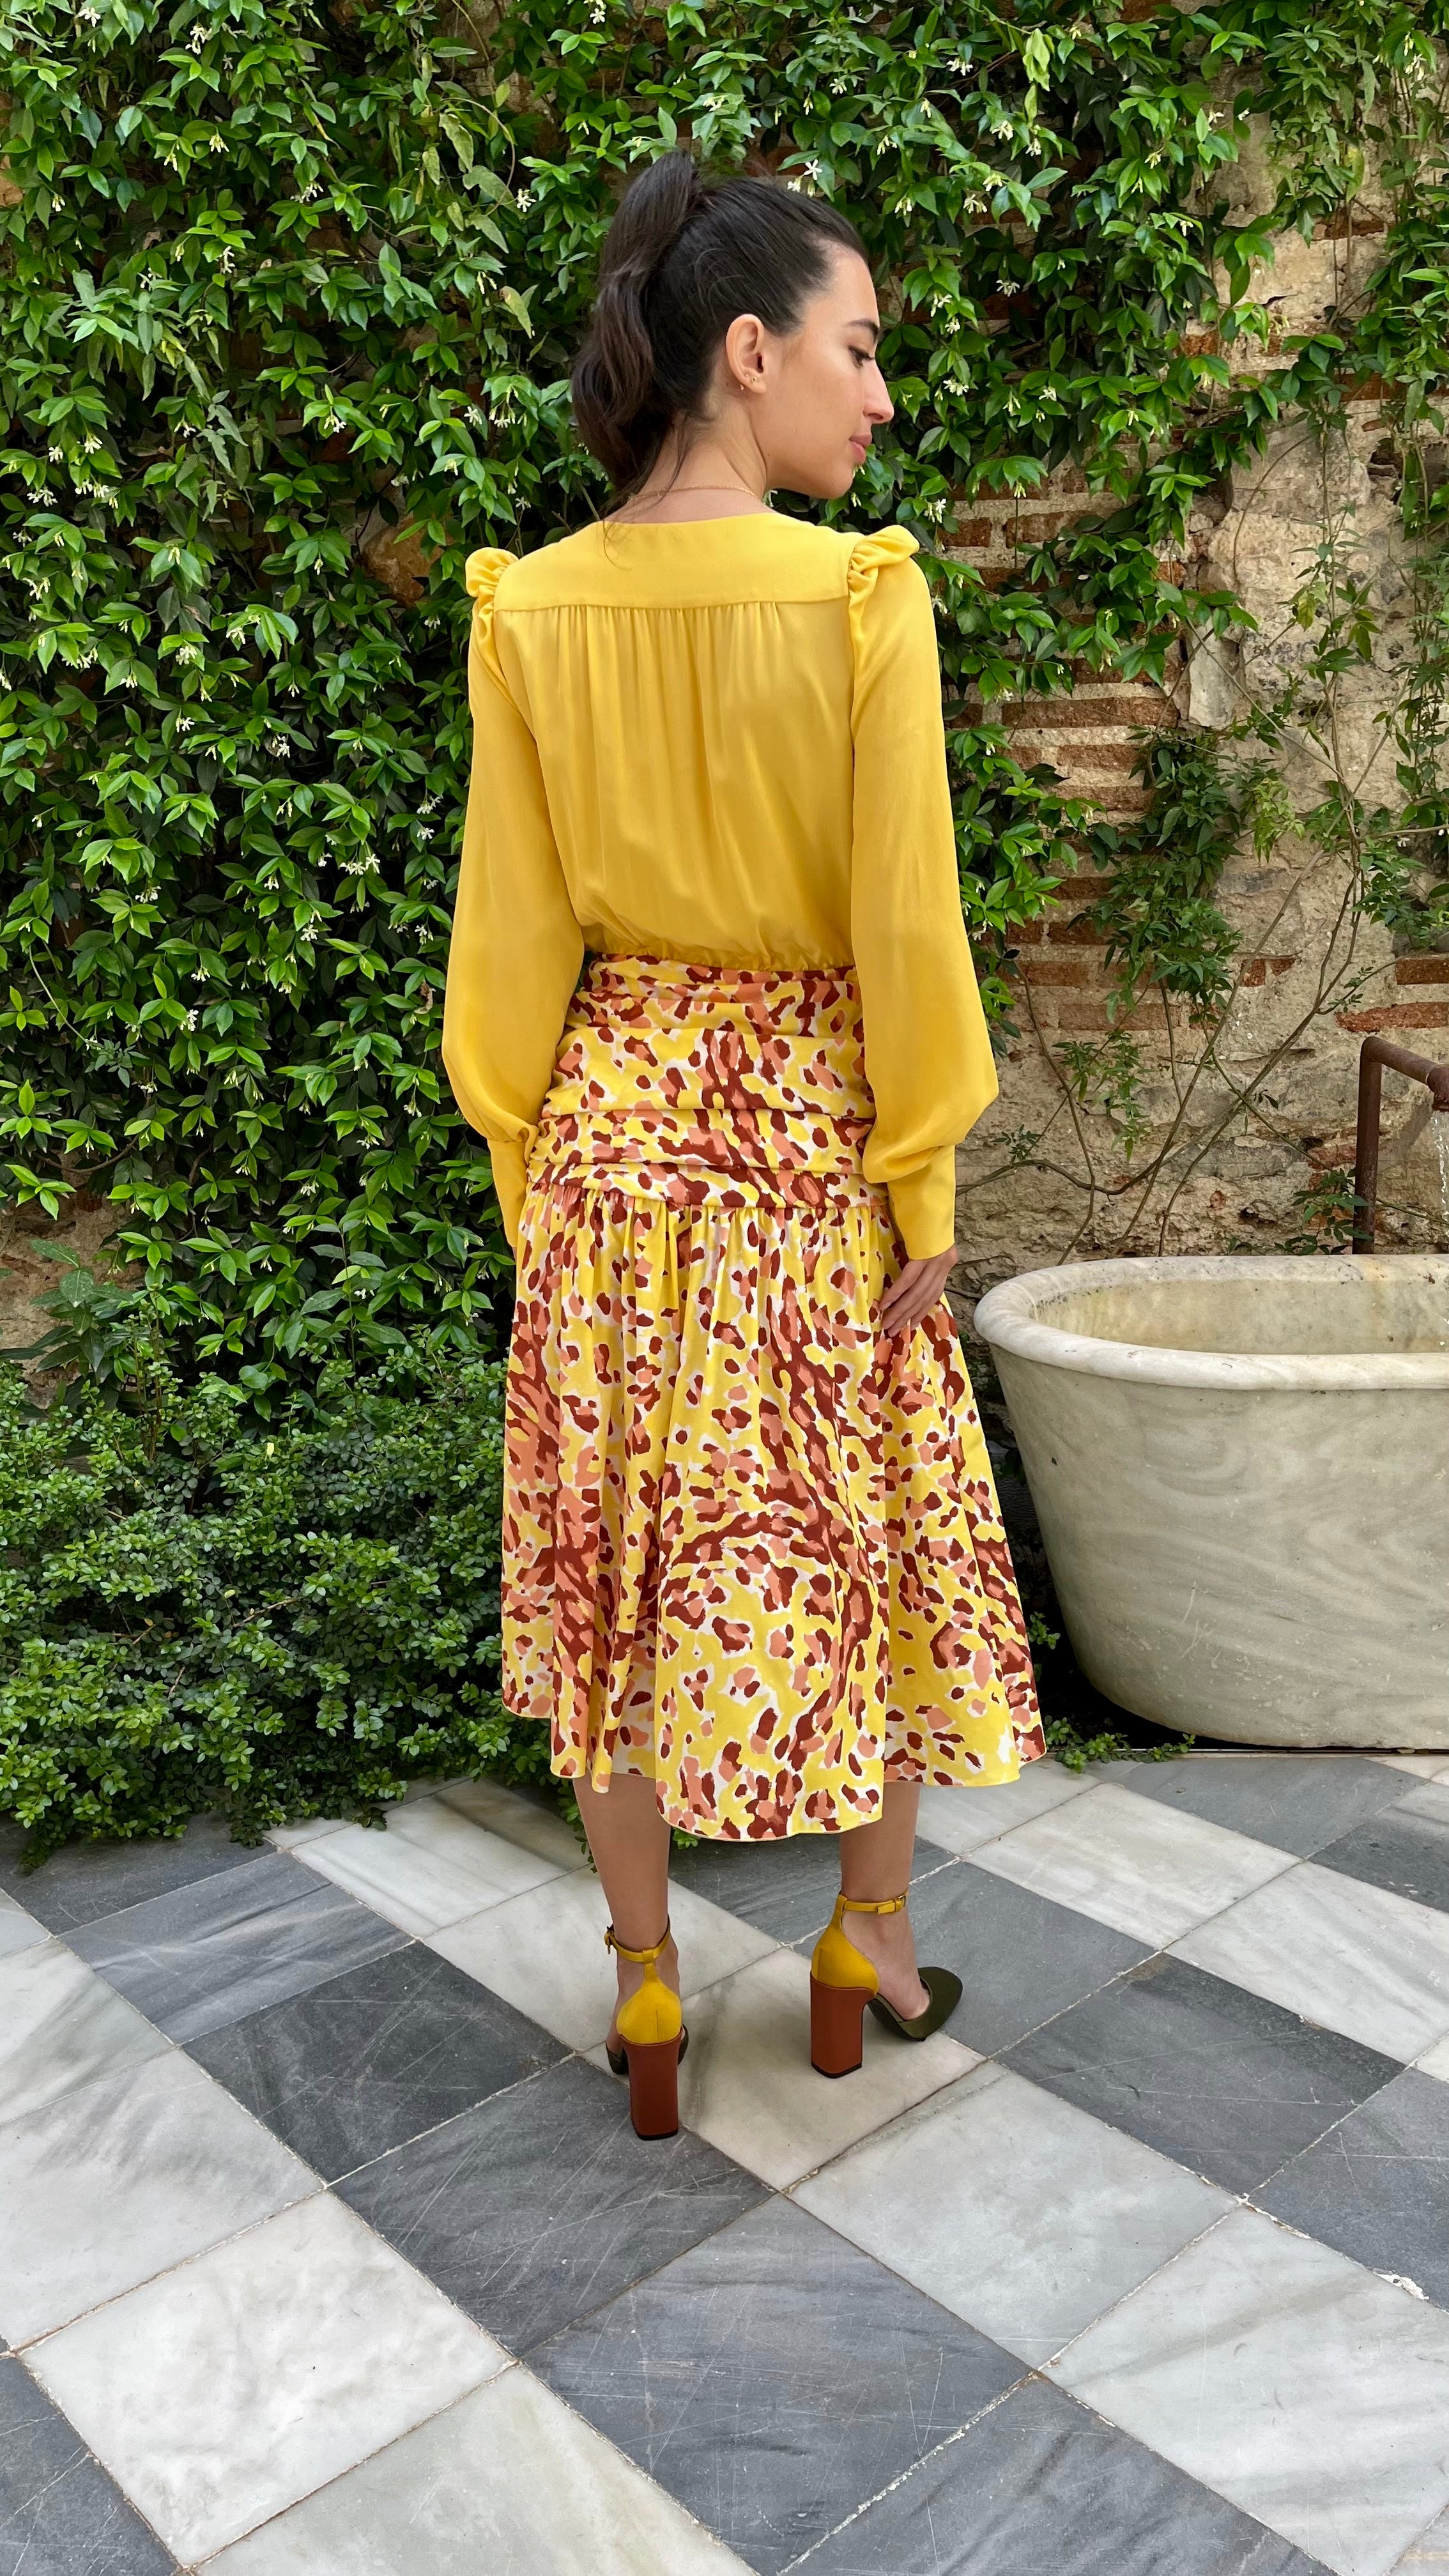 Alexandre Blanc Cowl Neck Dress Silk Yellow and Pink with leopard skirt pattern. Elegant dress for party or wedding. Midi length. Shown on model back view.